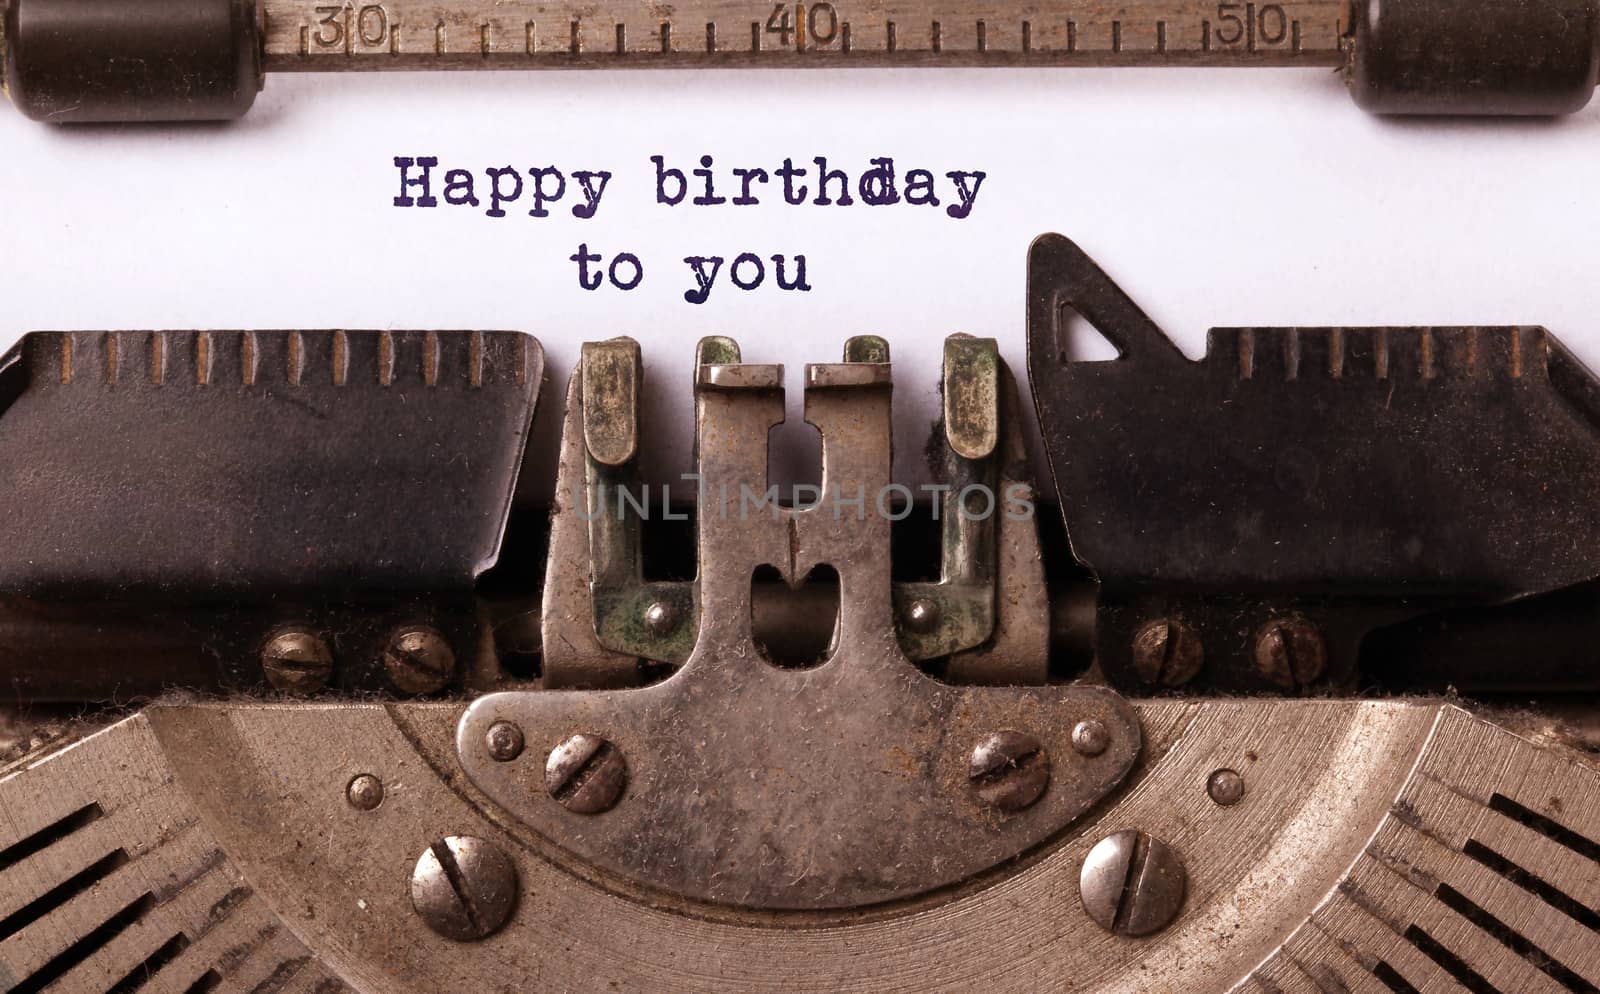 Happy birthday to you, written on an old typewriter, vintage